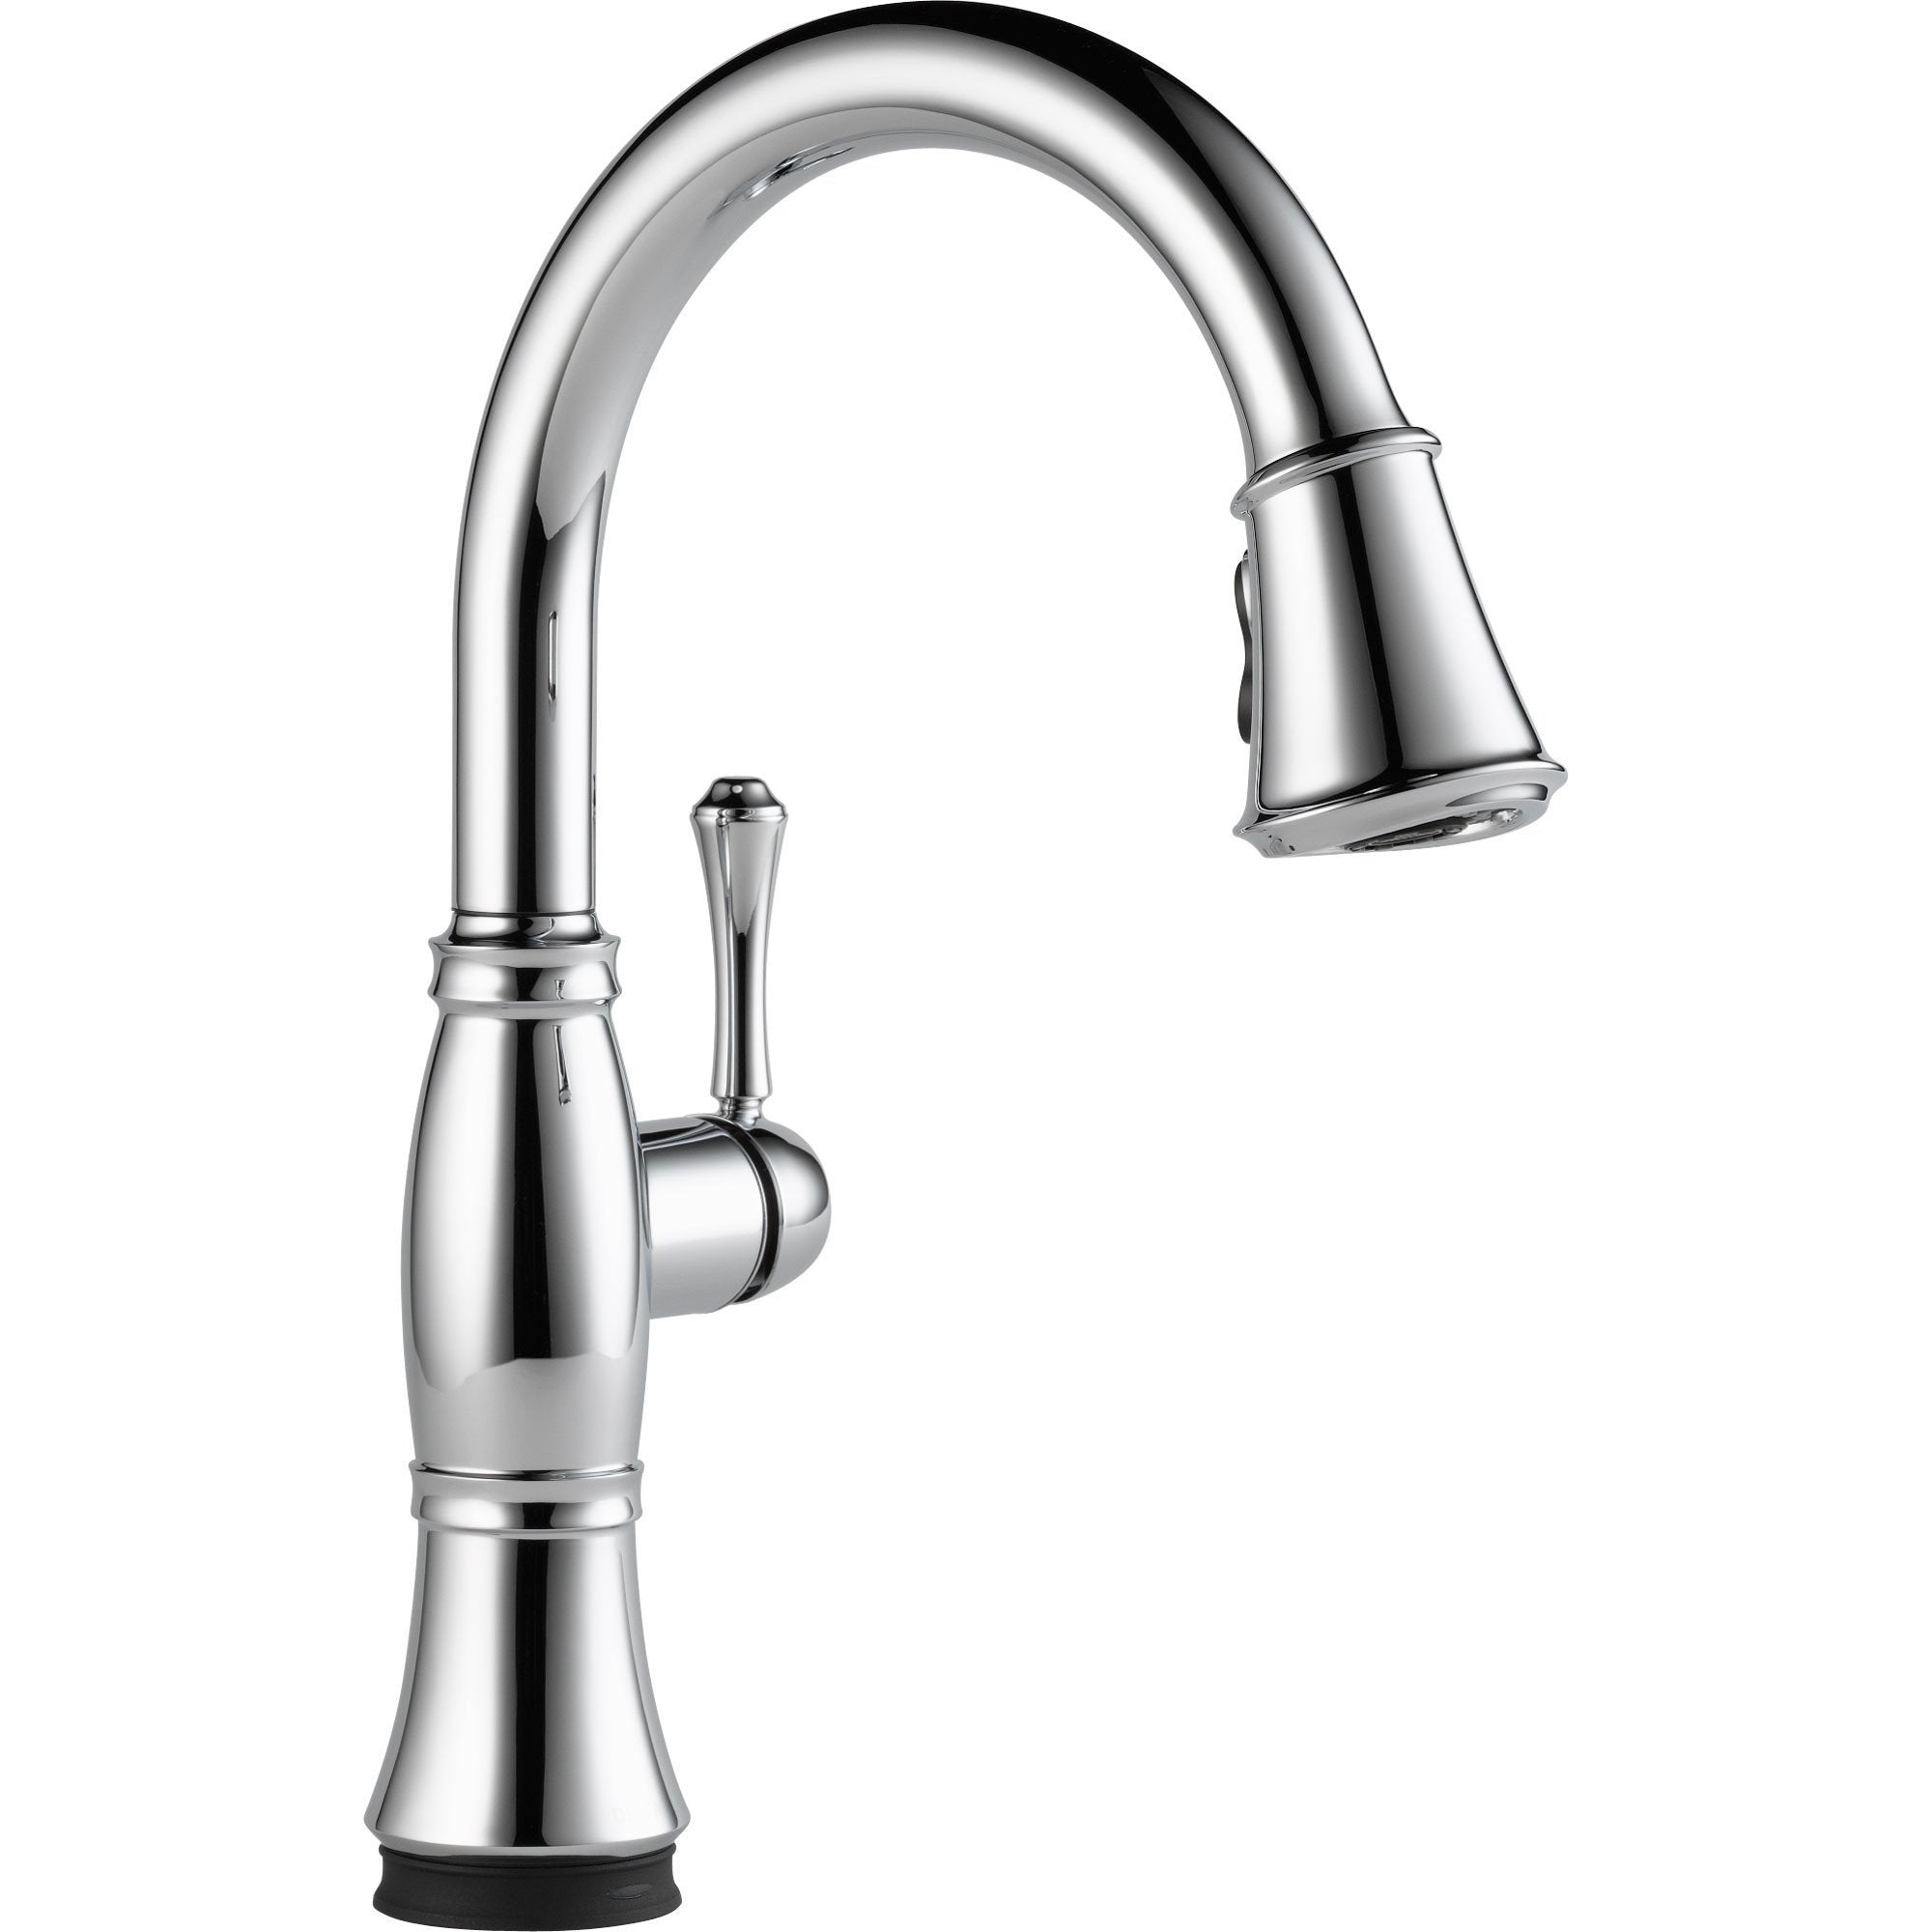 Delta Cassidy Touch2O Chrome Finish Pull-Down Sprayer Kitchen Faucet 579595